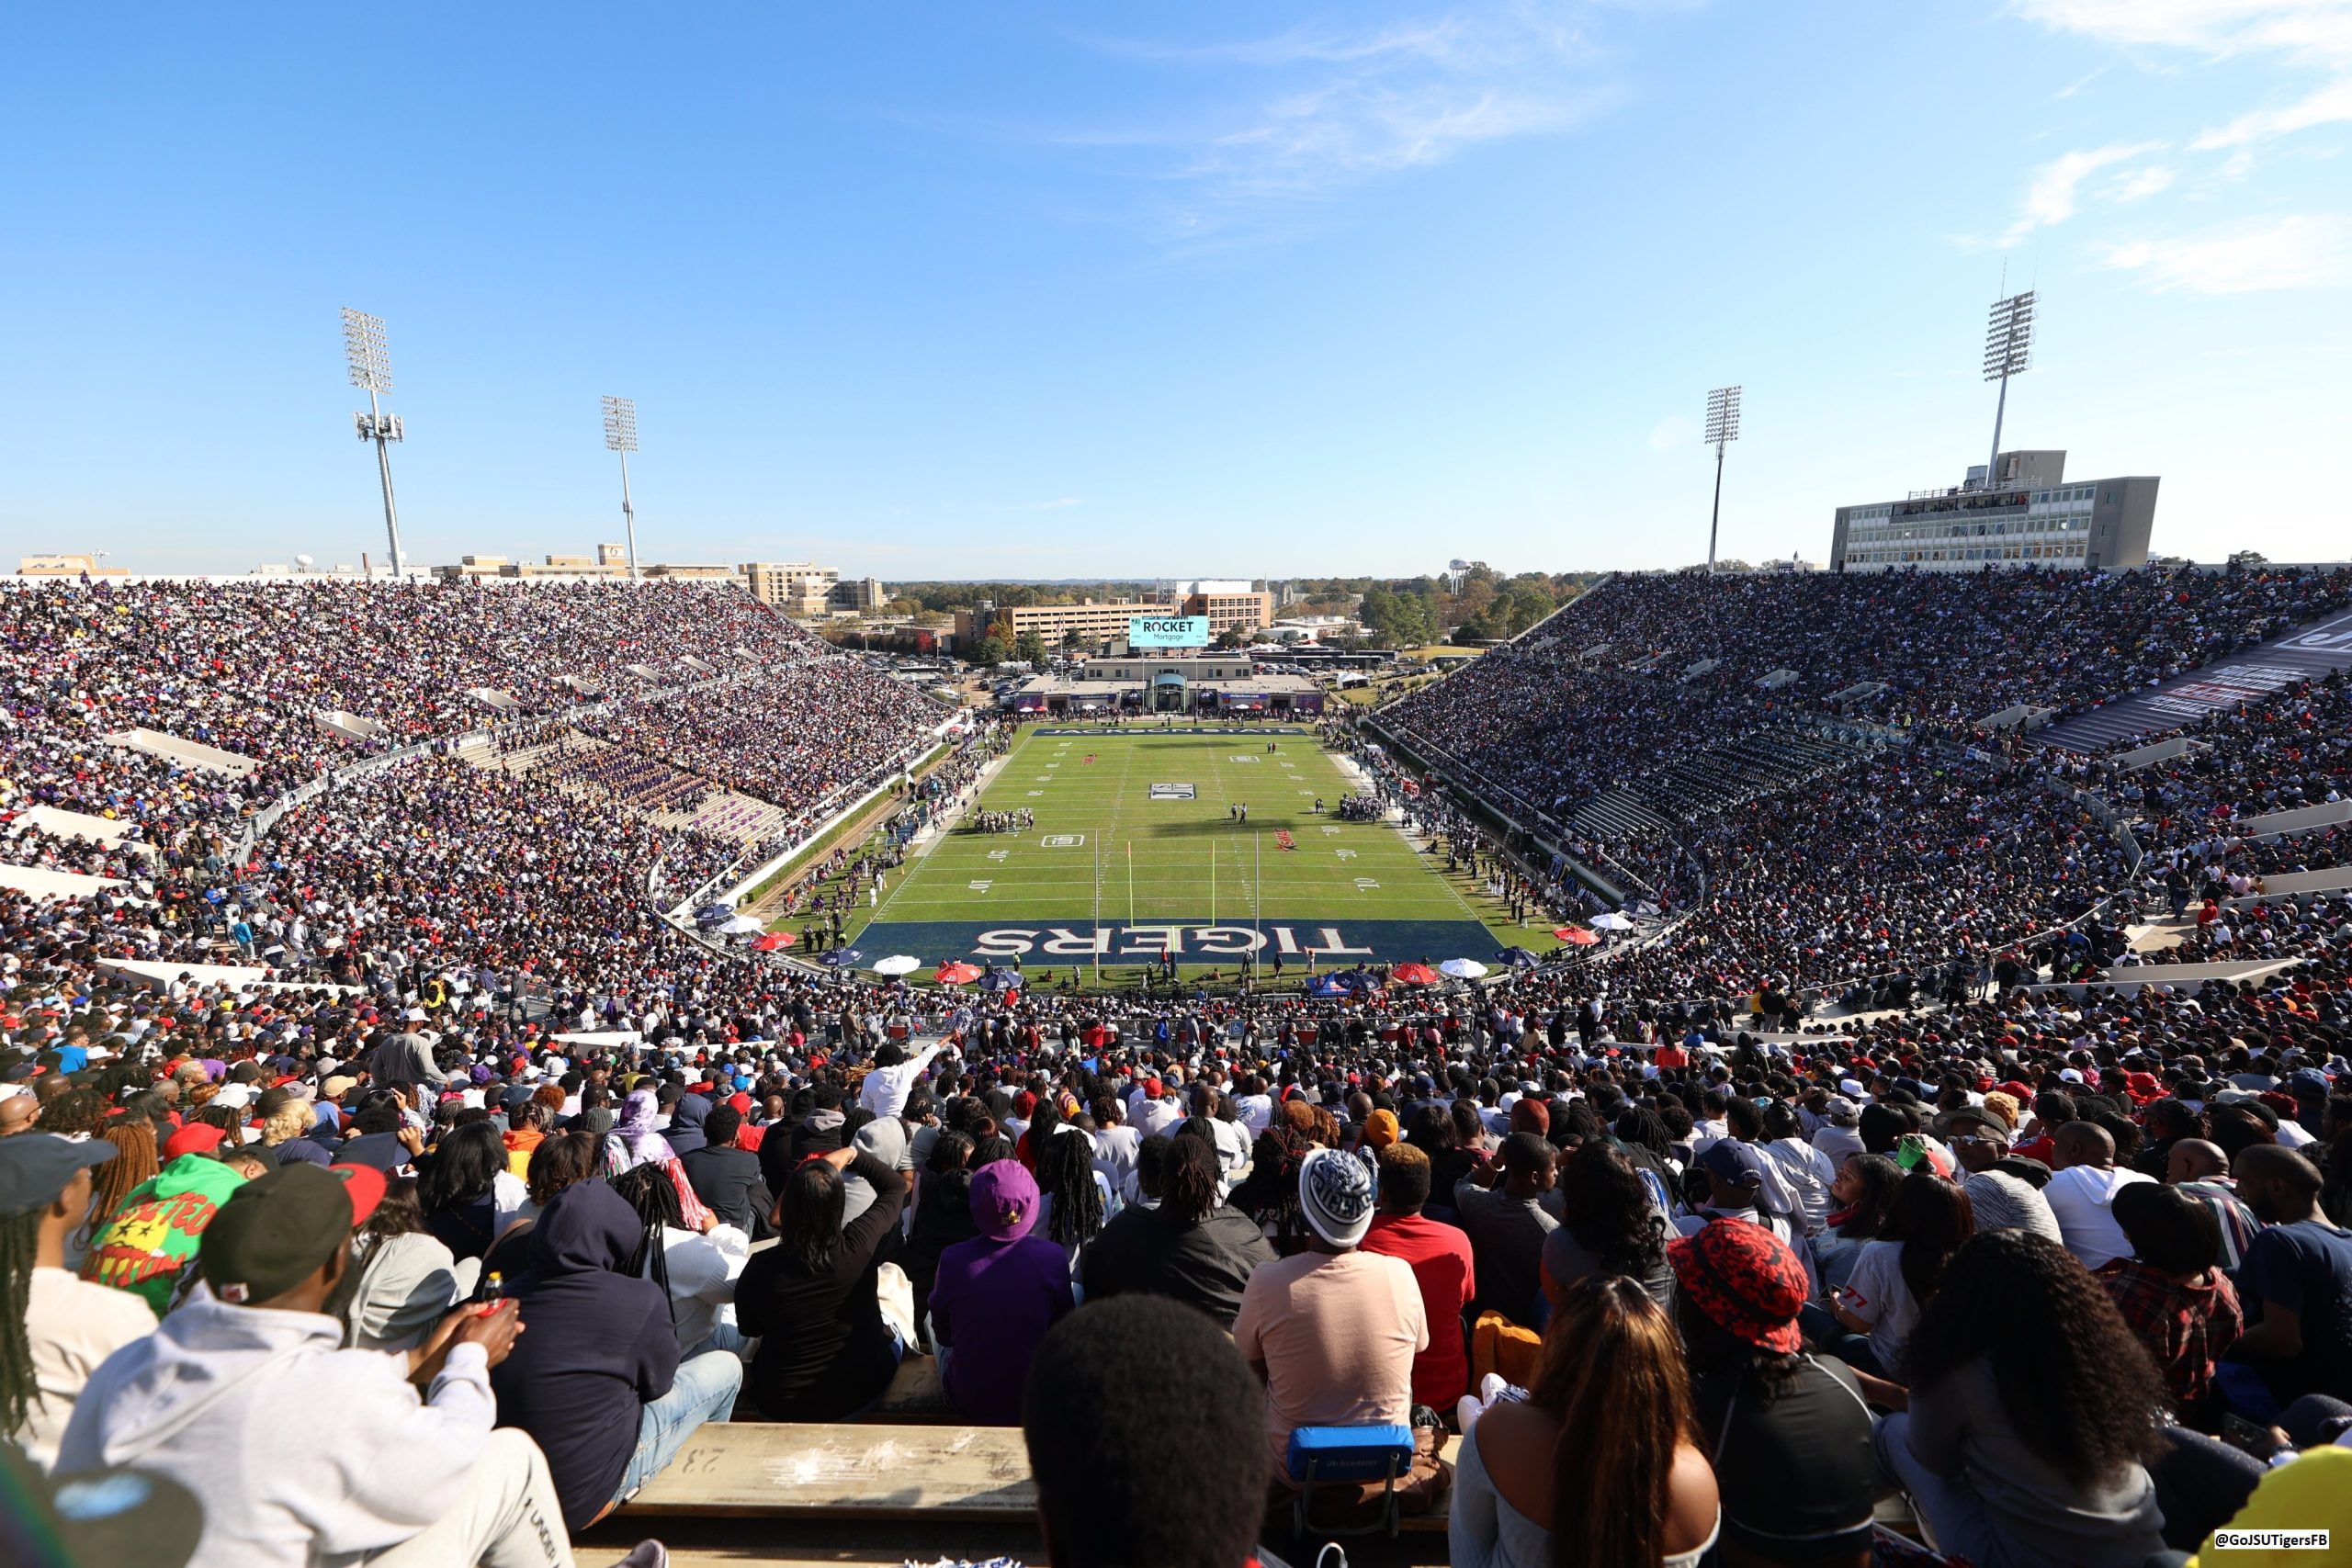 Jackson State Keeps Producing Jaw-Dropping Attendance Under Coach Prime